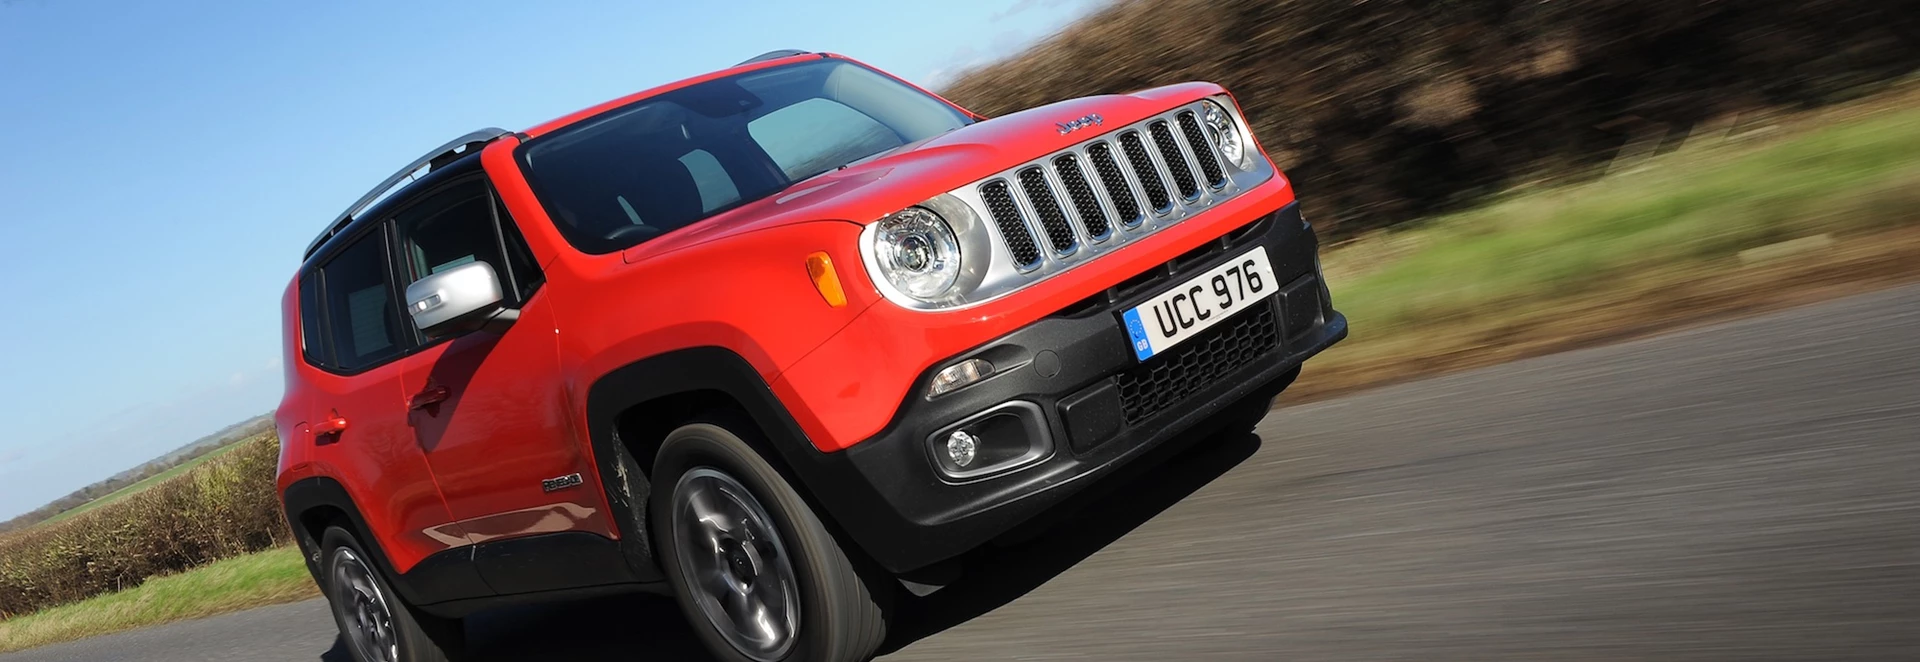 Jeep Scrappage Scheme 2017: How much can you save? 